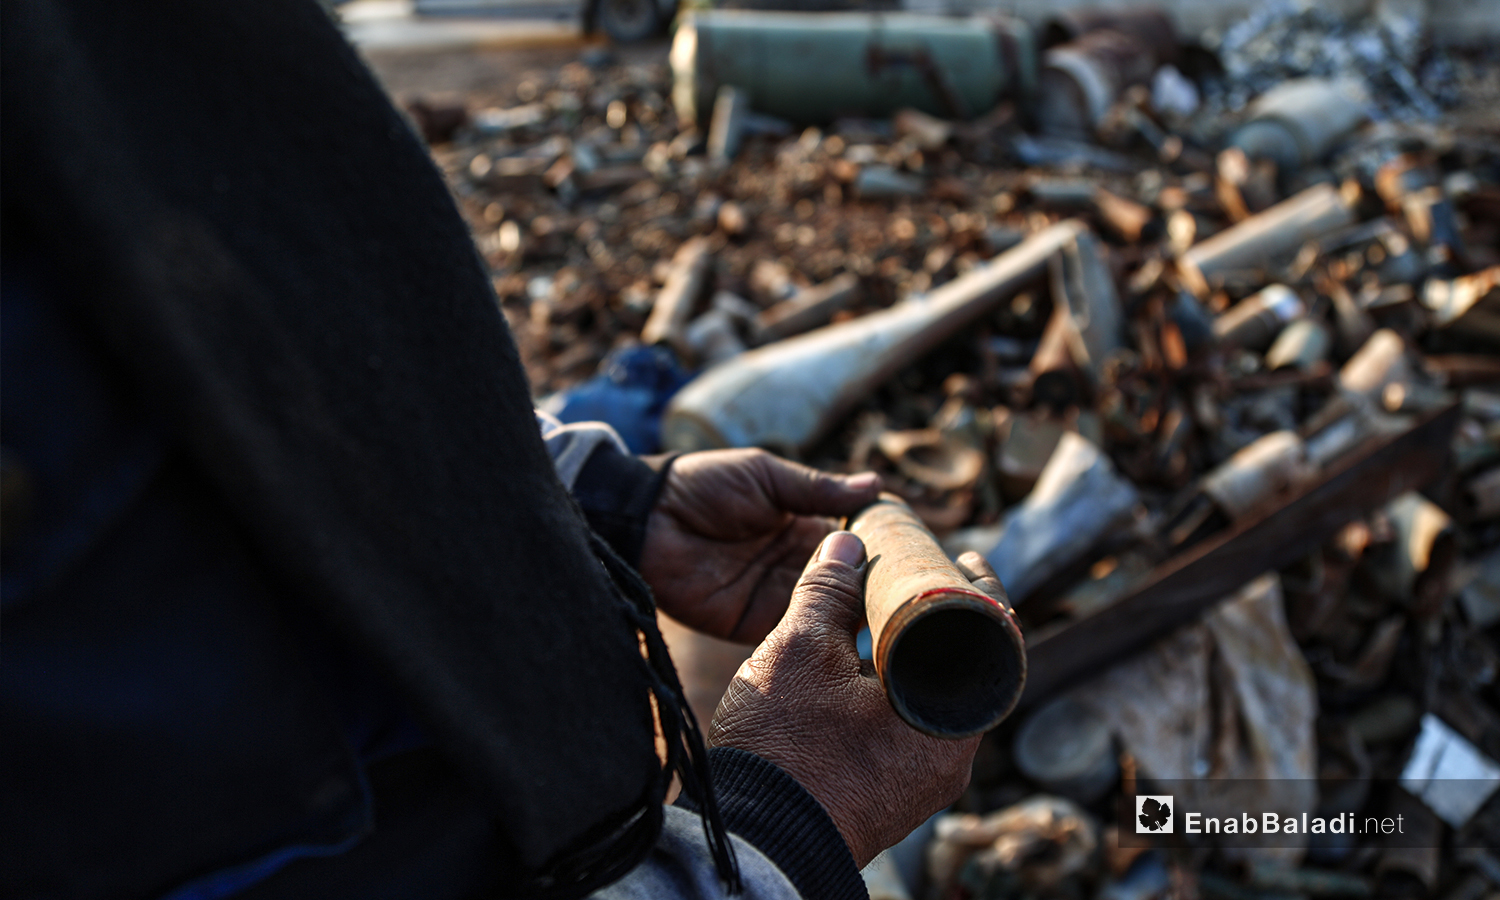 Abu Ahmad said when dismantling unexploded ordnance in the northern countryside of Idlib; he uses primitive tools such as a chisel, a hammer, and a ranch key - 5 March 2021 (Enab Baladi / Youssef Gharibi)